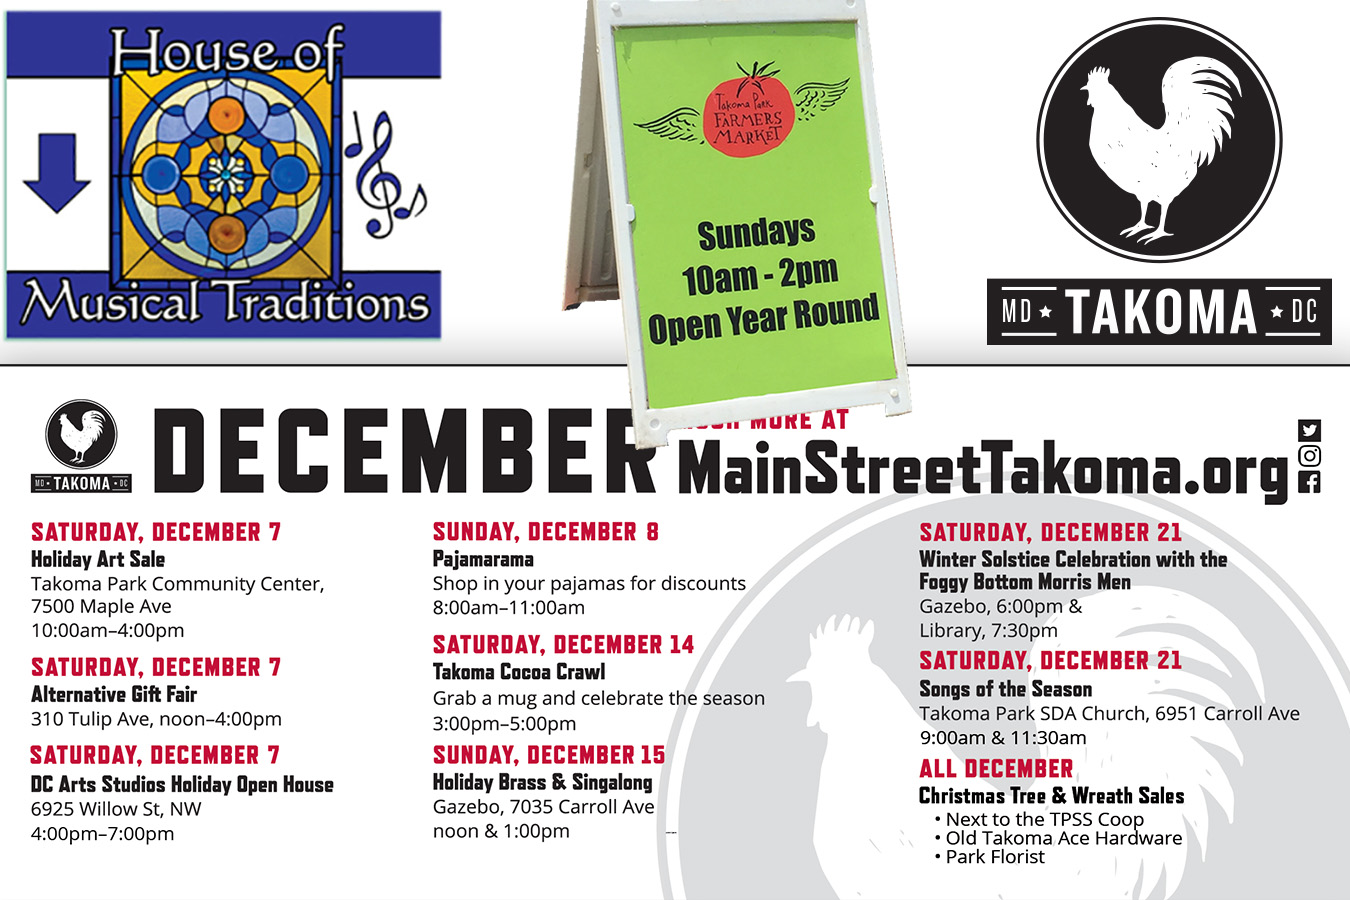 Takoma Park : Signage and branding work done for Old Takoma Business Association and Members